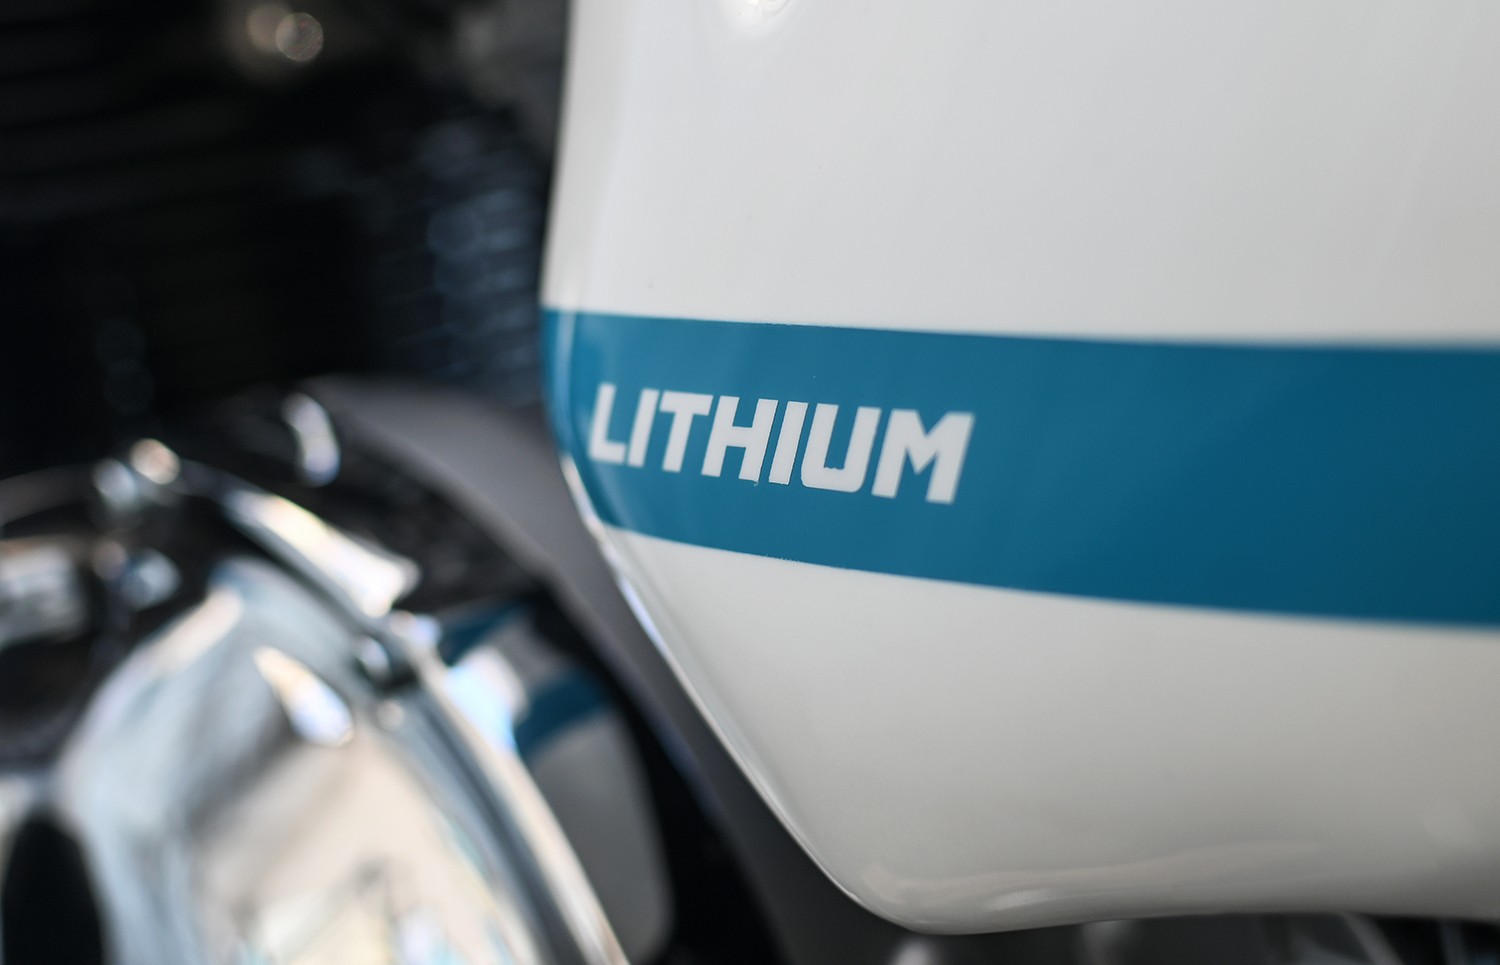 triumph thruxton lithium keeps things old school looks ready to hit the racetrack 4